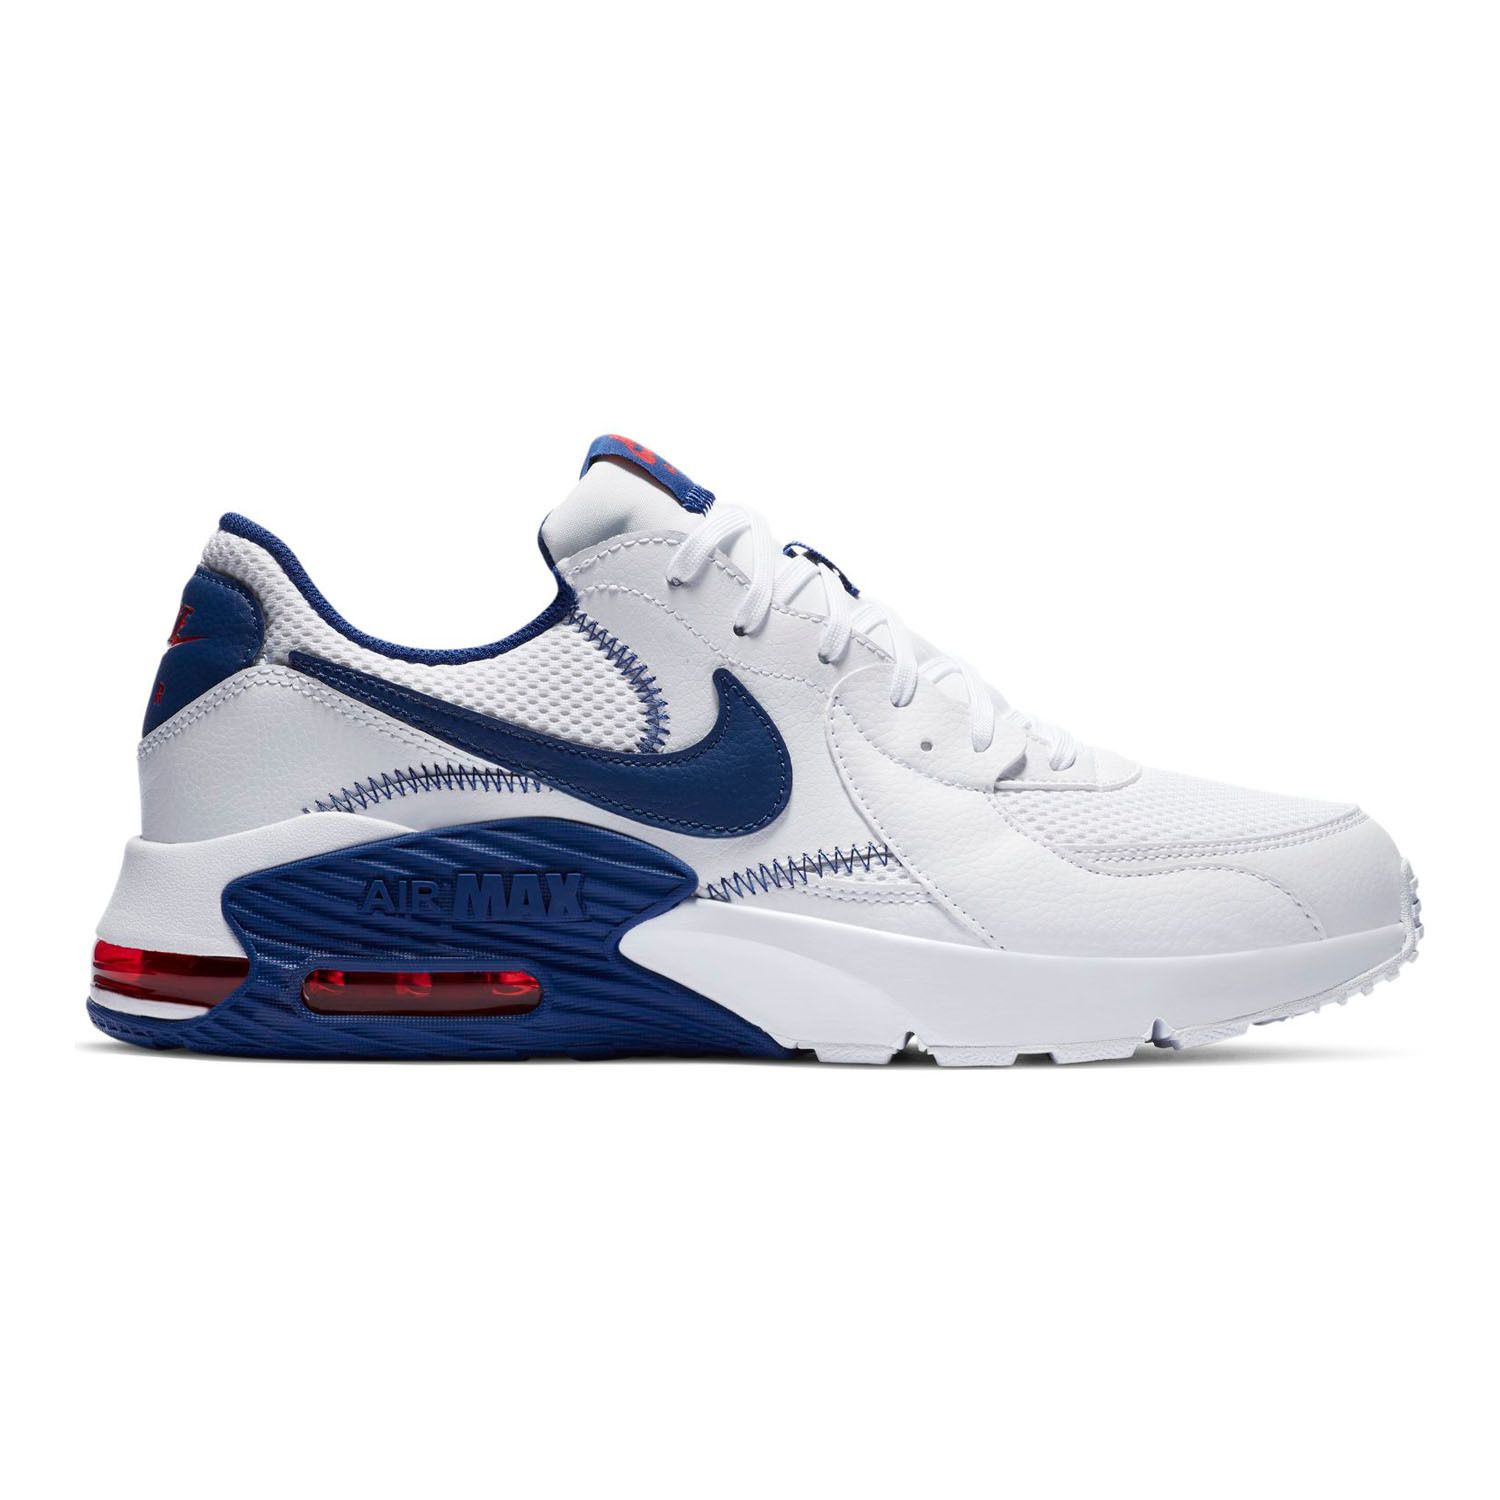 nike men's air max excee running shoes